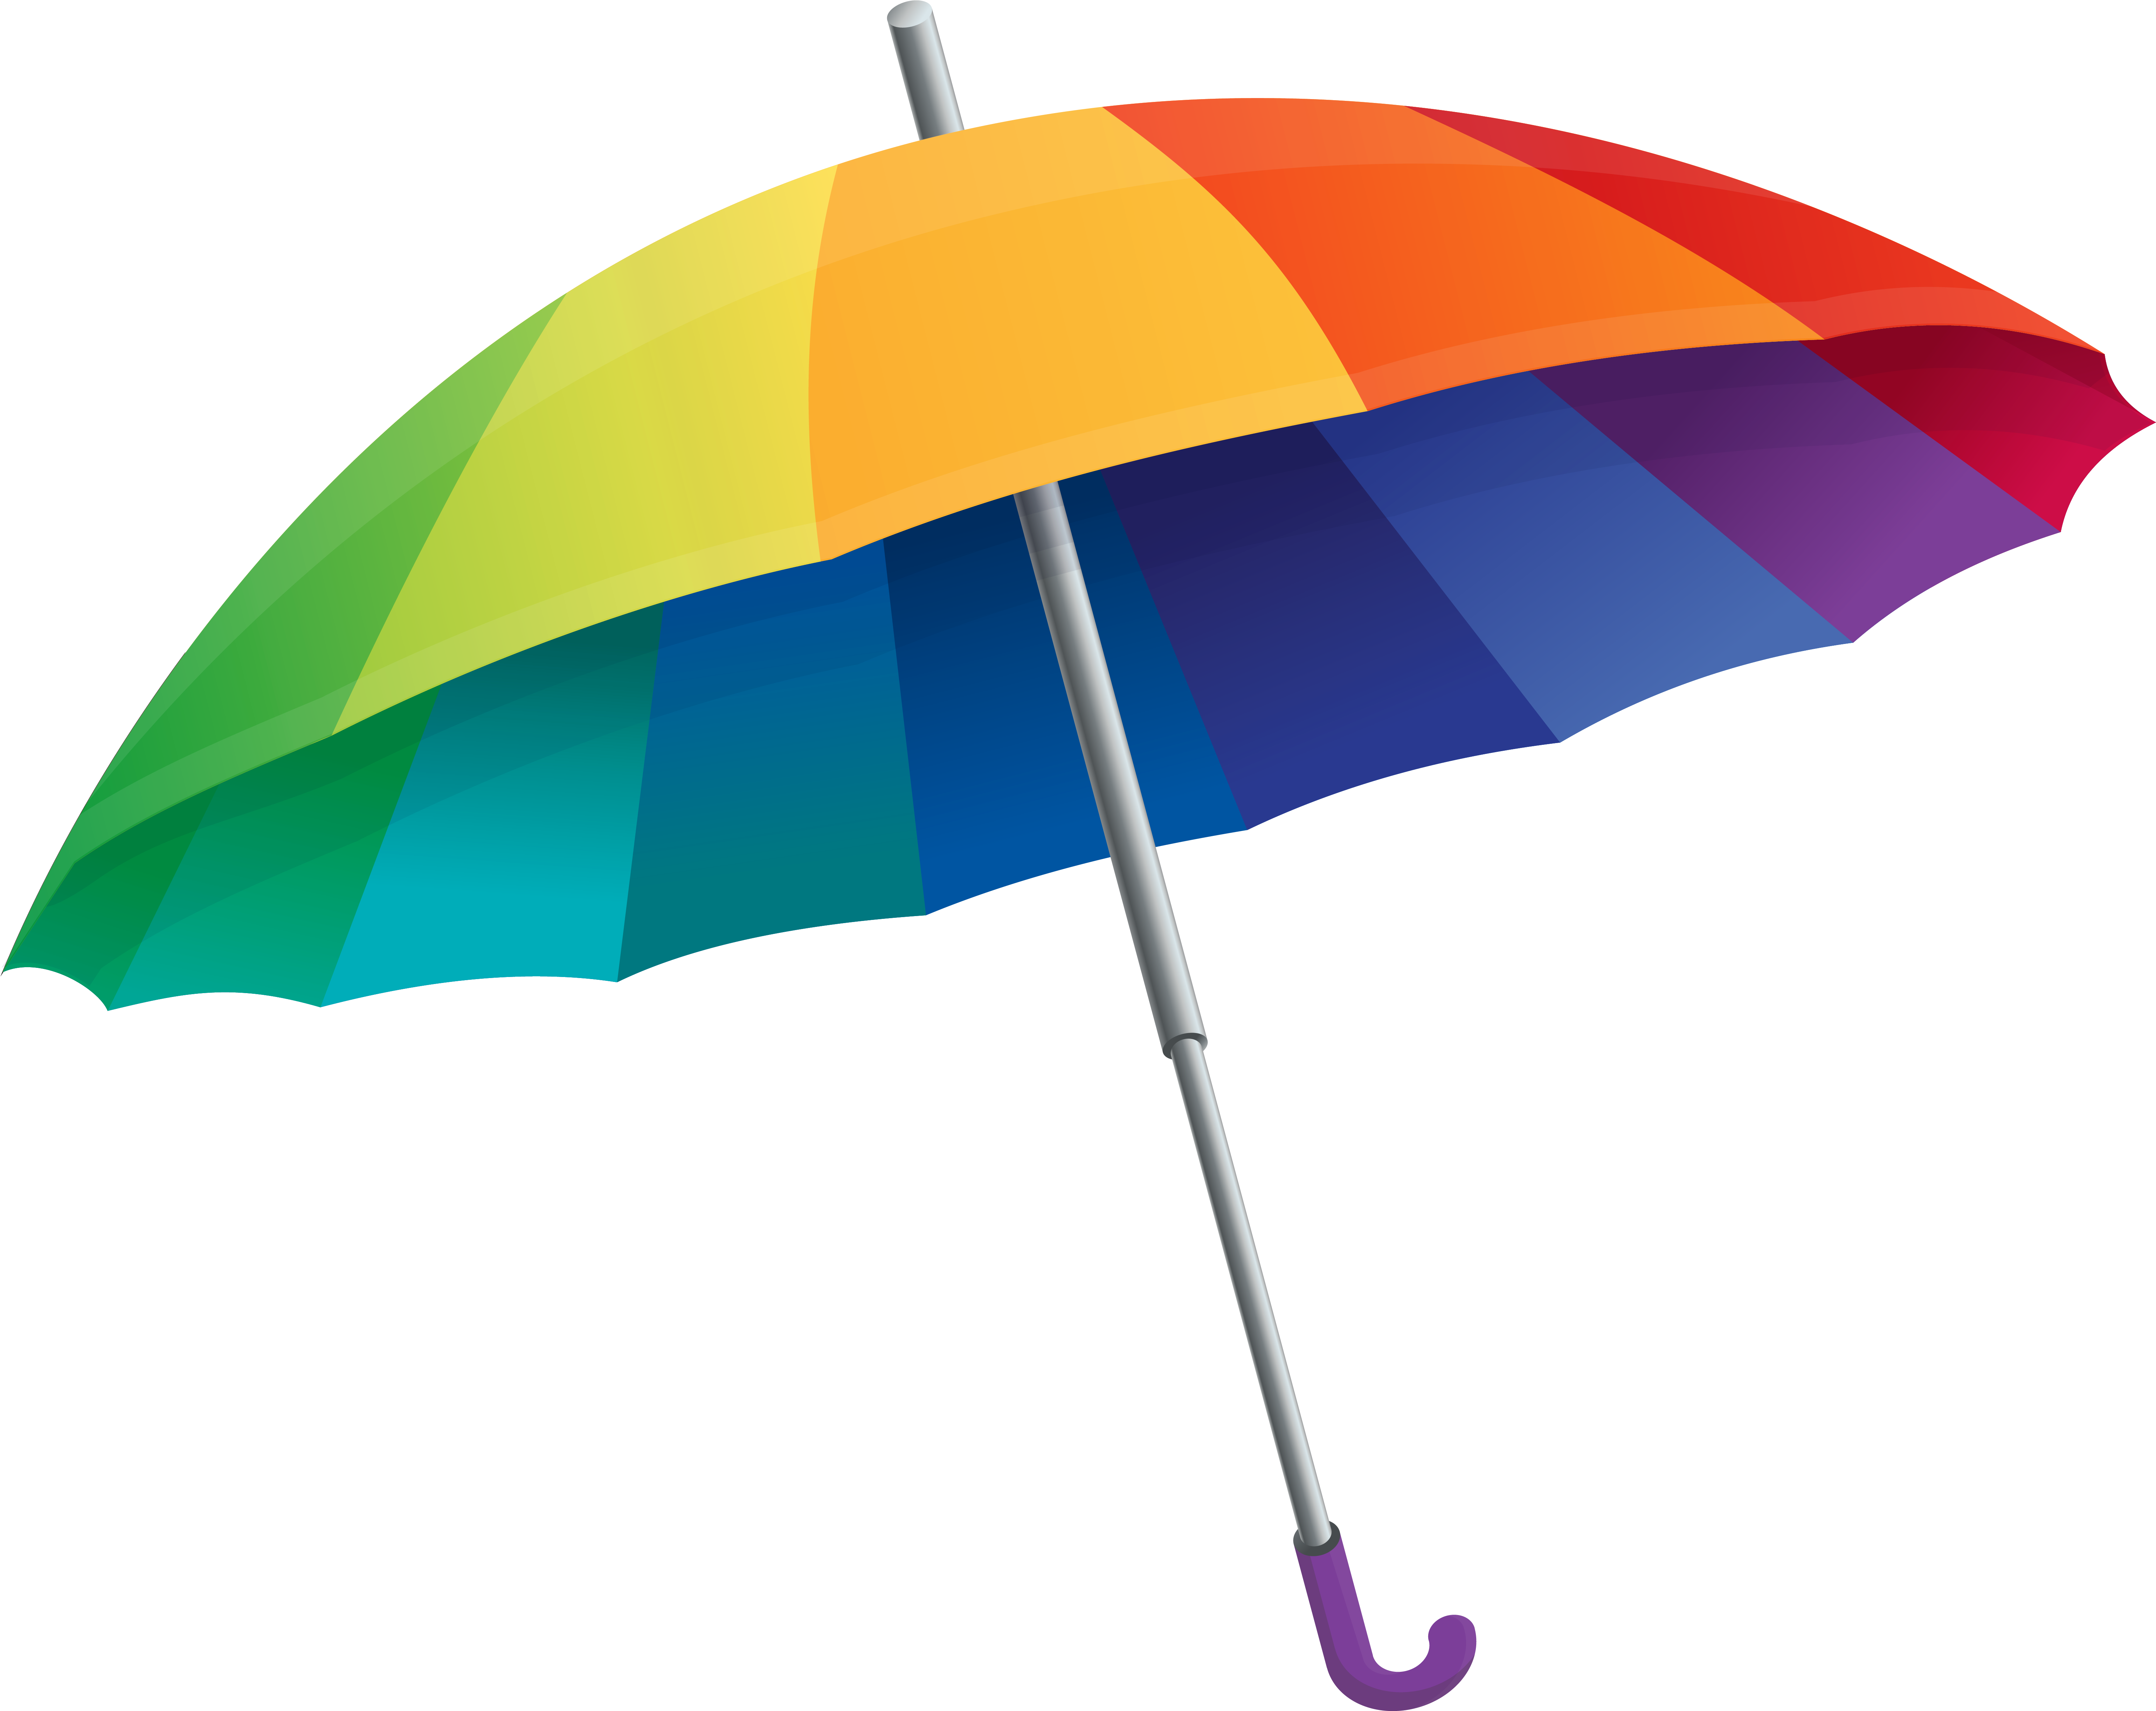 Download Objects Colorful Umbrella Png Image With No Background Pngkey Com